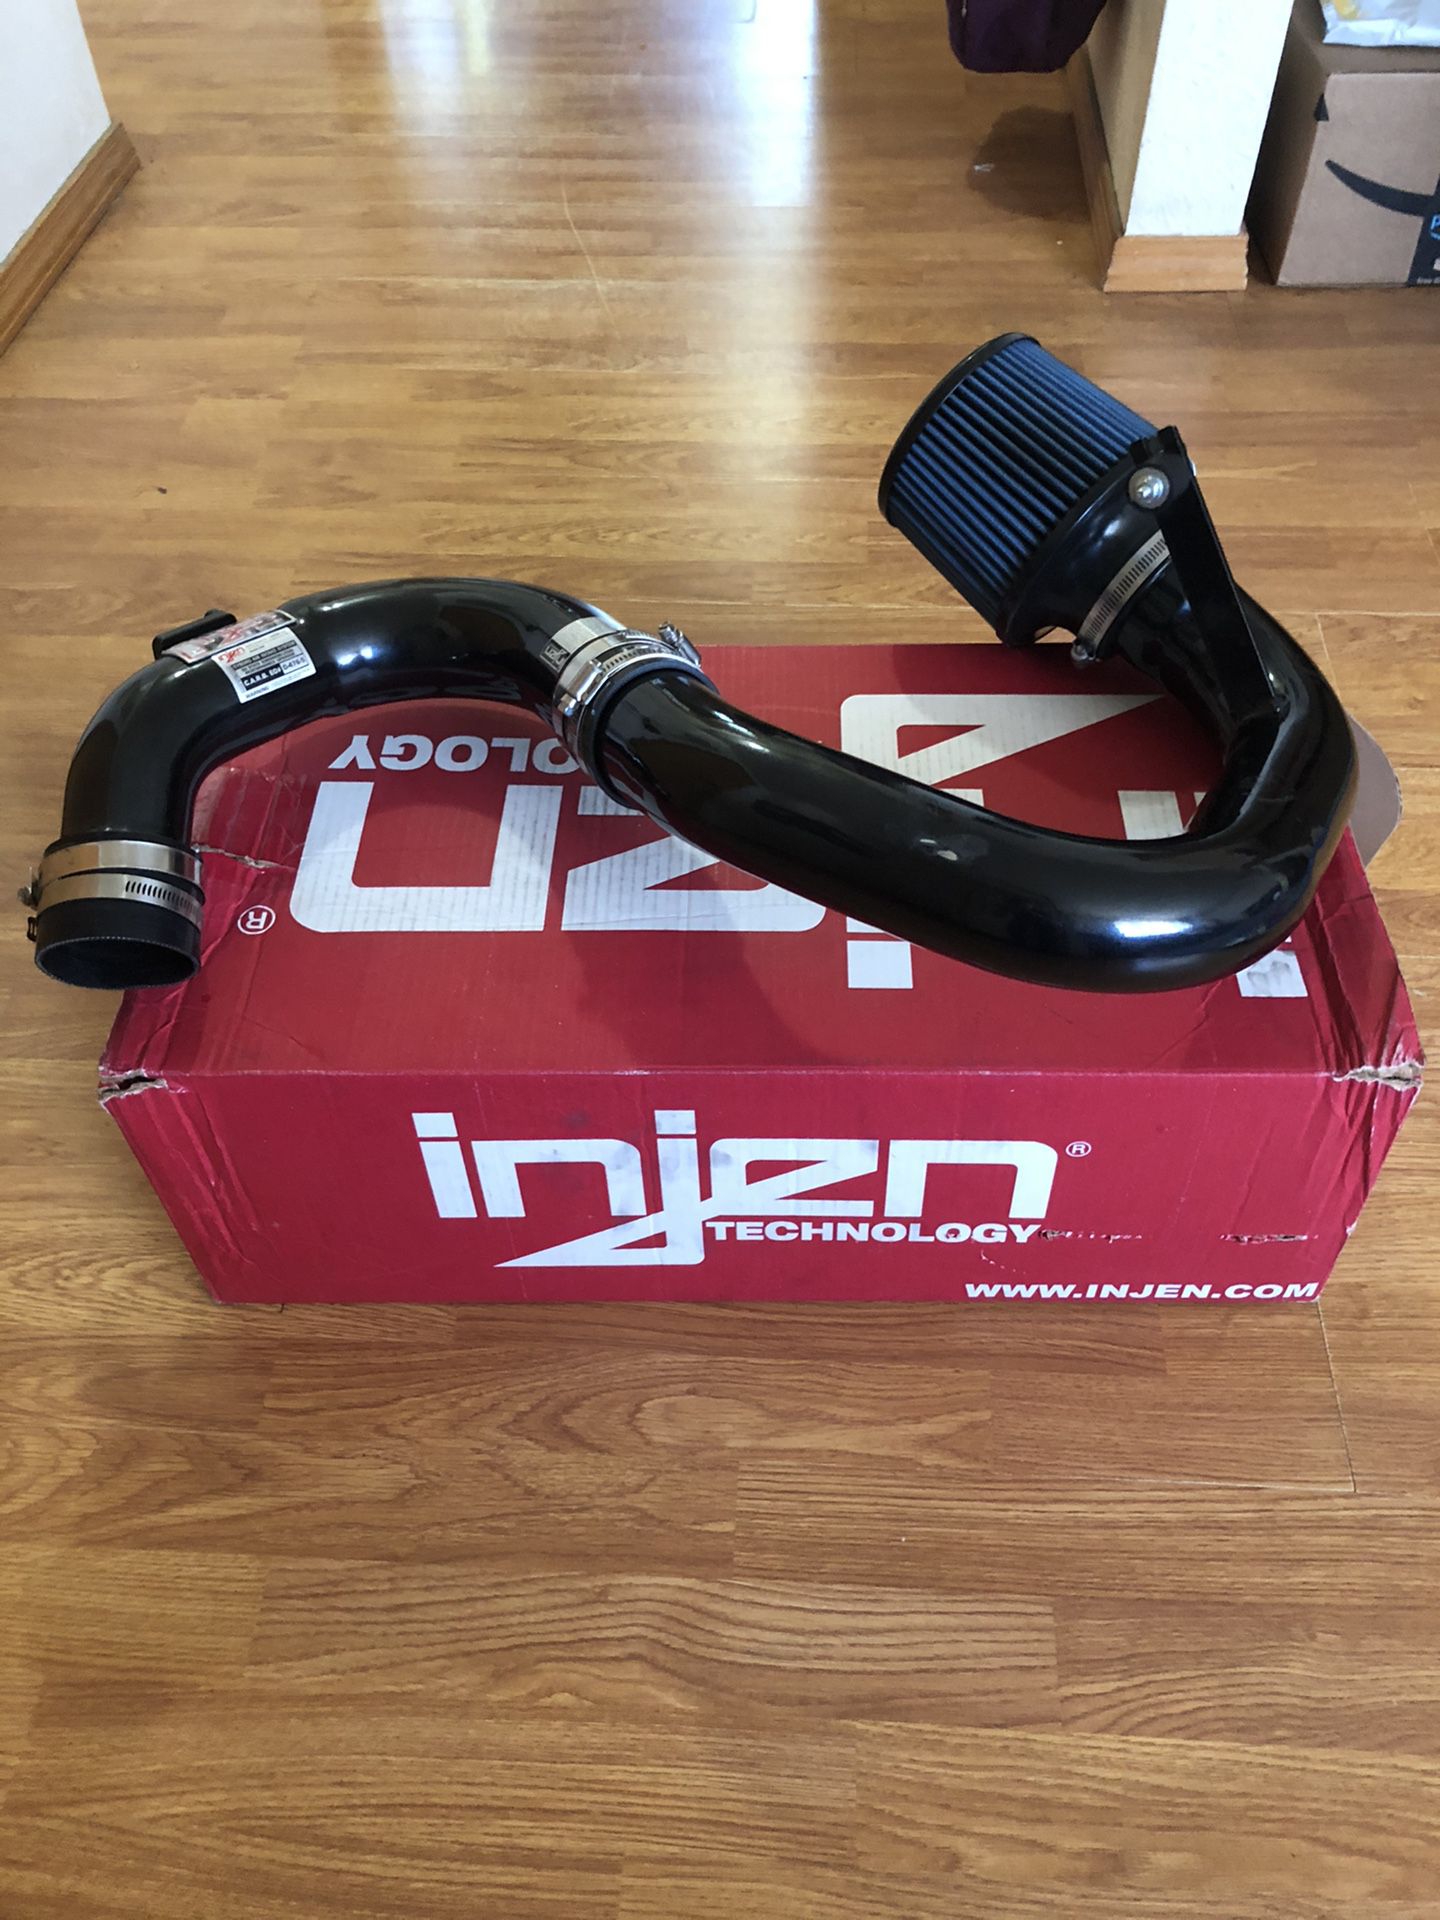 Injen cold air Intake for first generation mazda 3